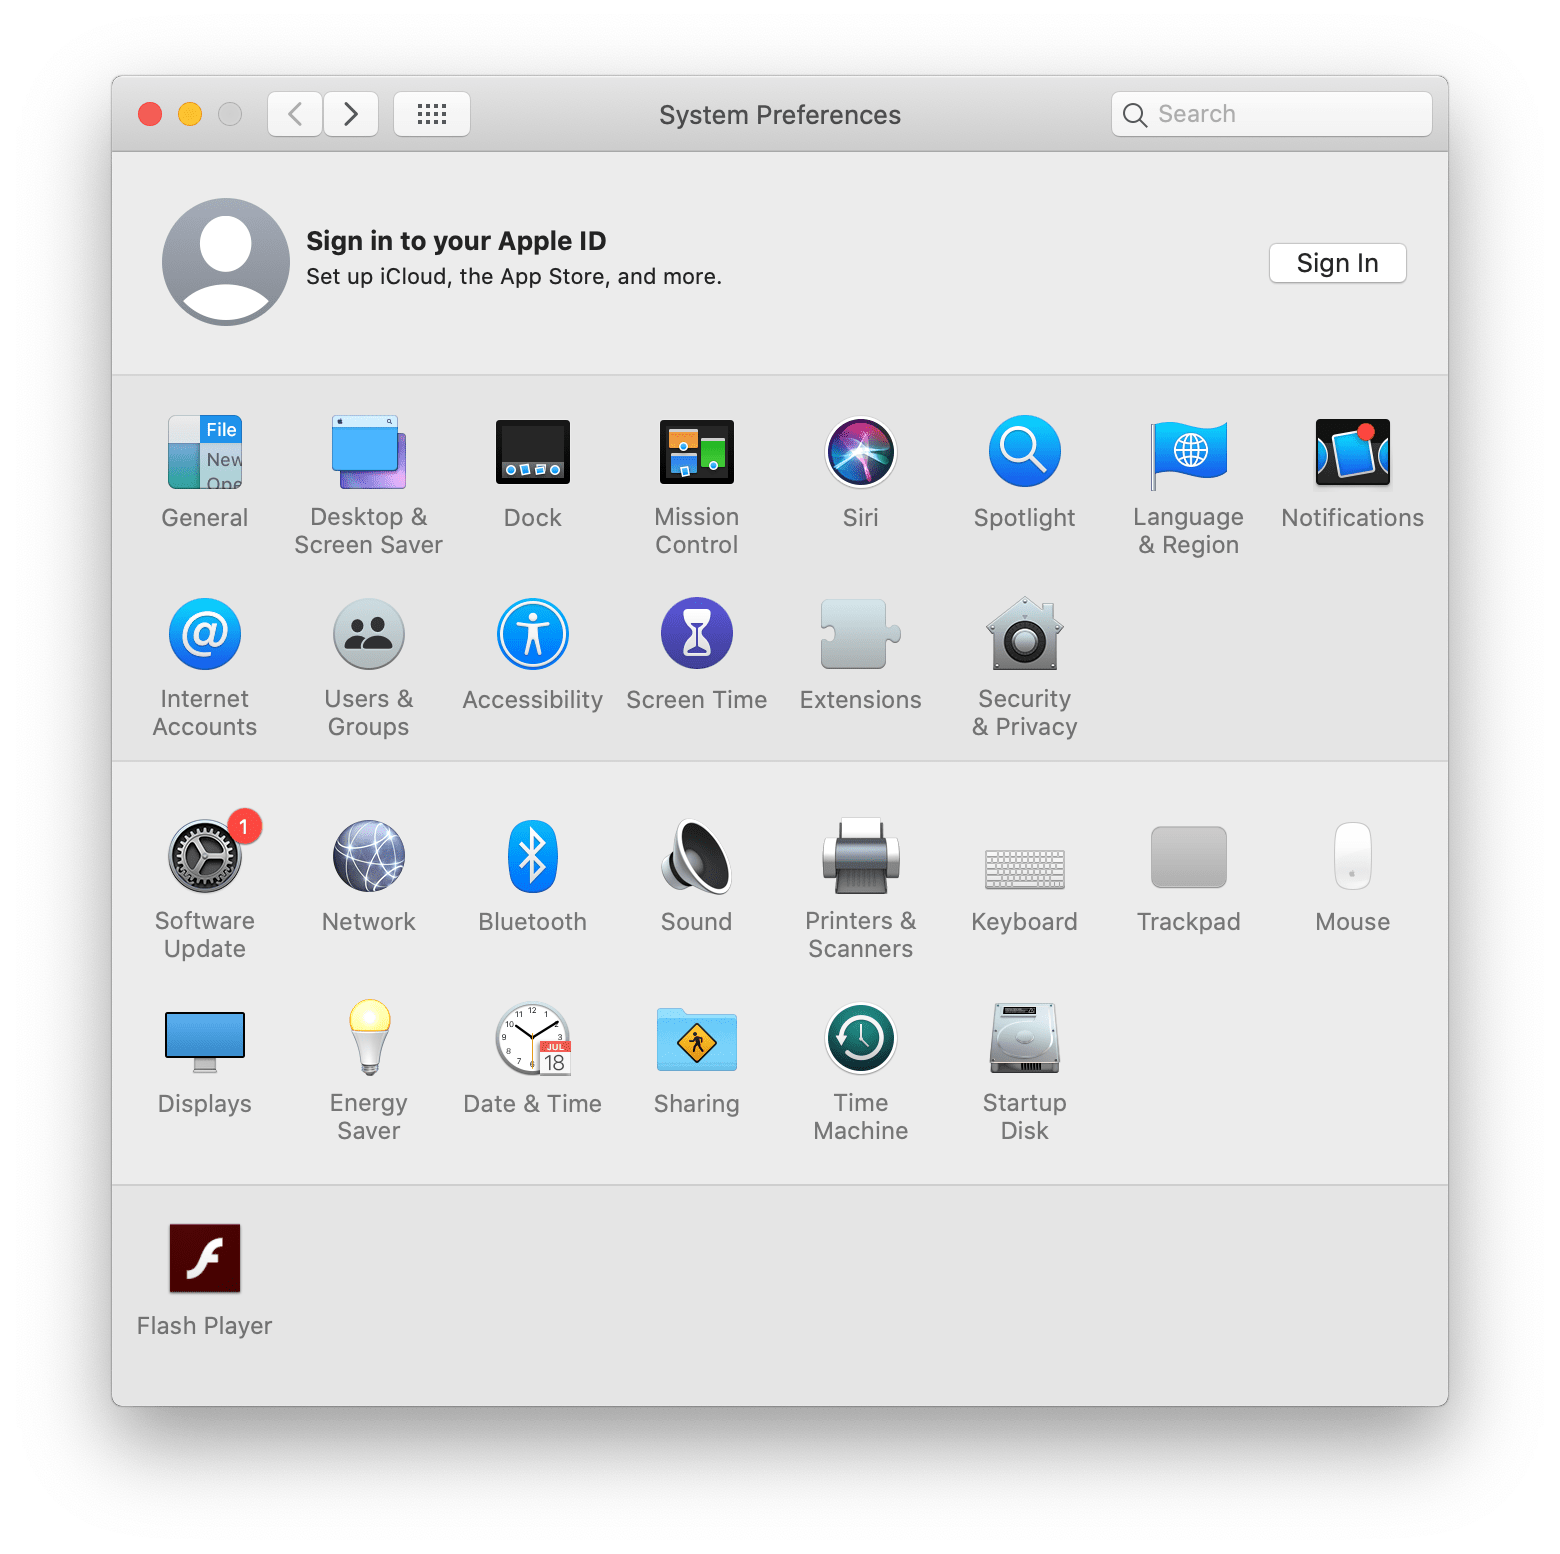 System preferences window in macOS Catalina